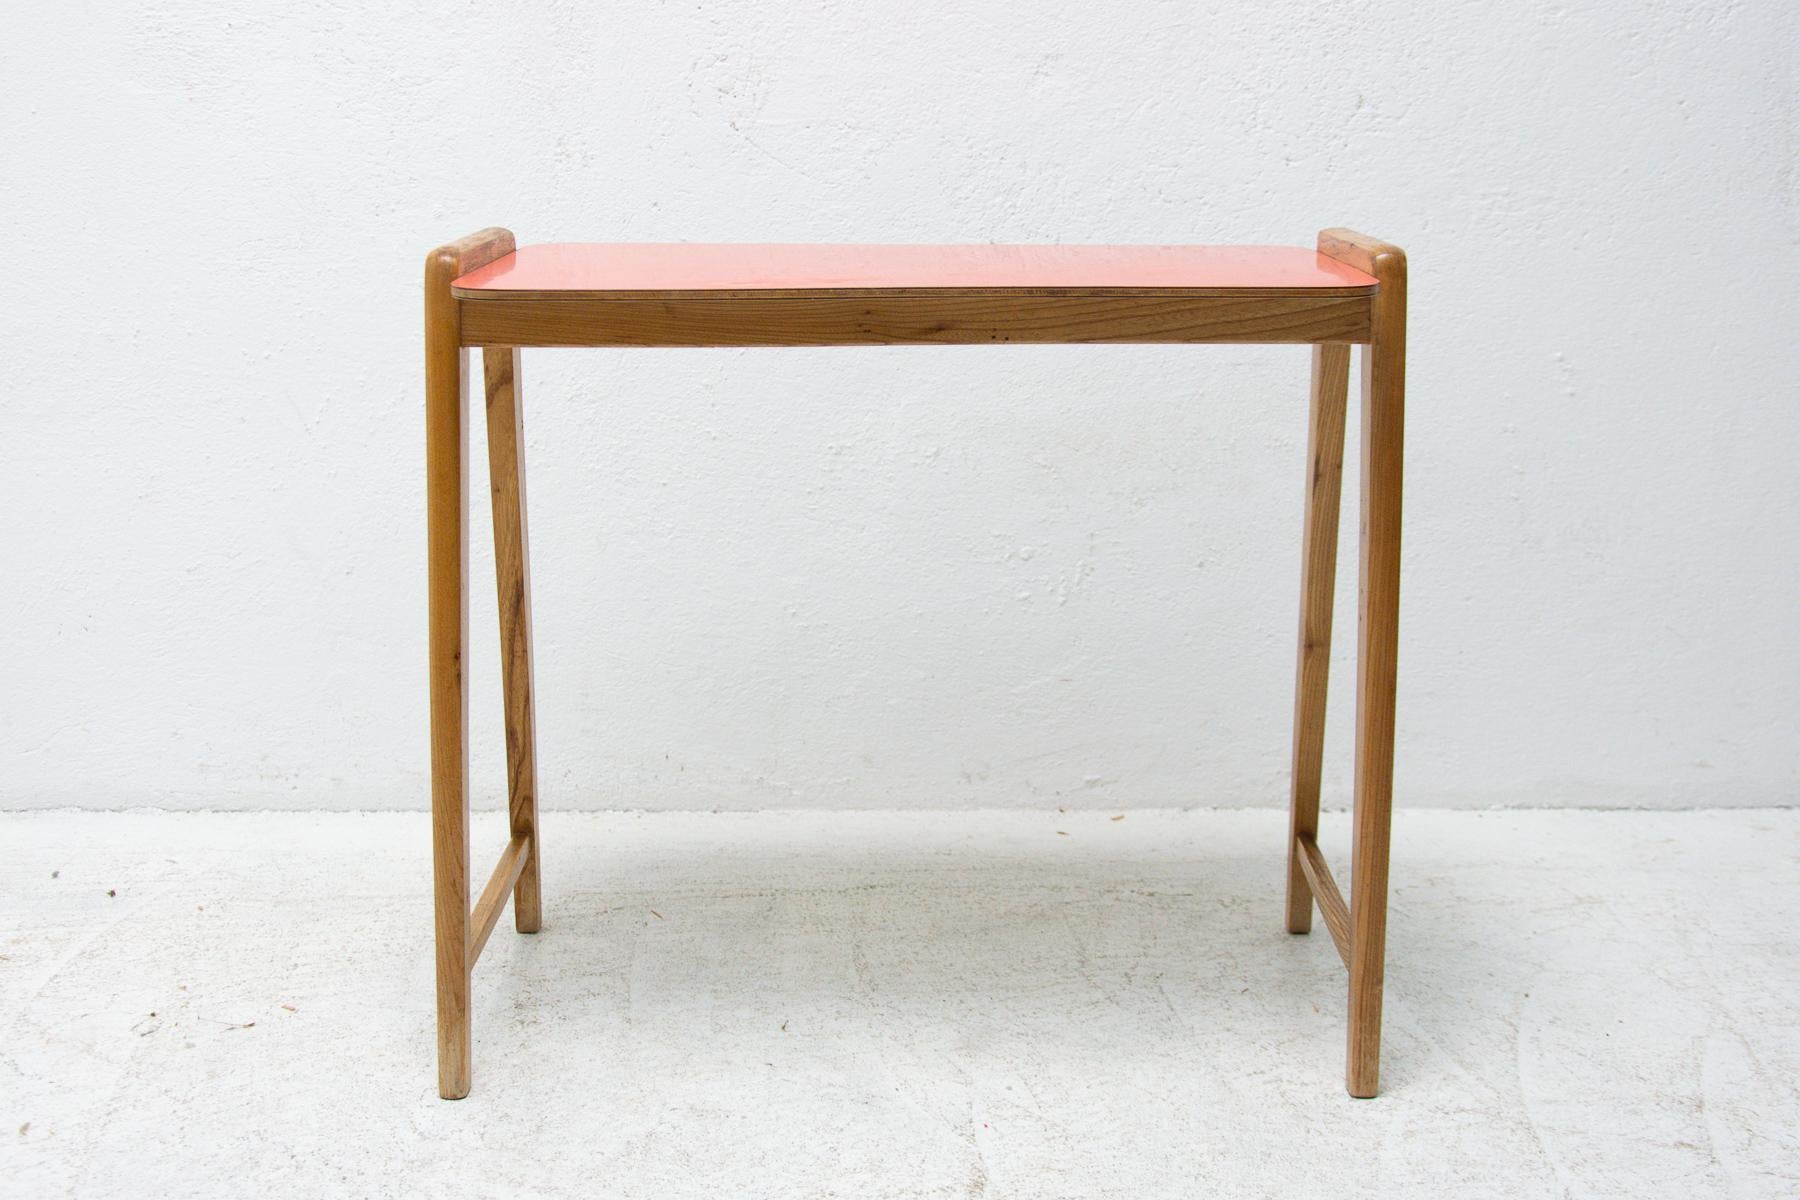 Mid century plant stand or side table with a Formica board. It was made by Krásná Jizba company in the former Czechoslovakia in the 1950´s.
It´s made of beech wood. Overall in very good vintage condition, bearing signs of age and using on the